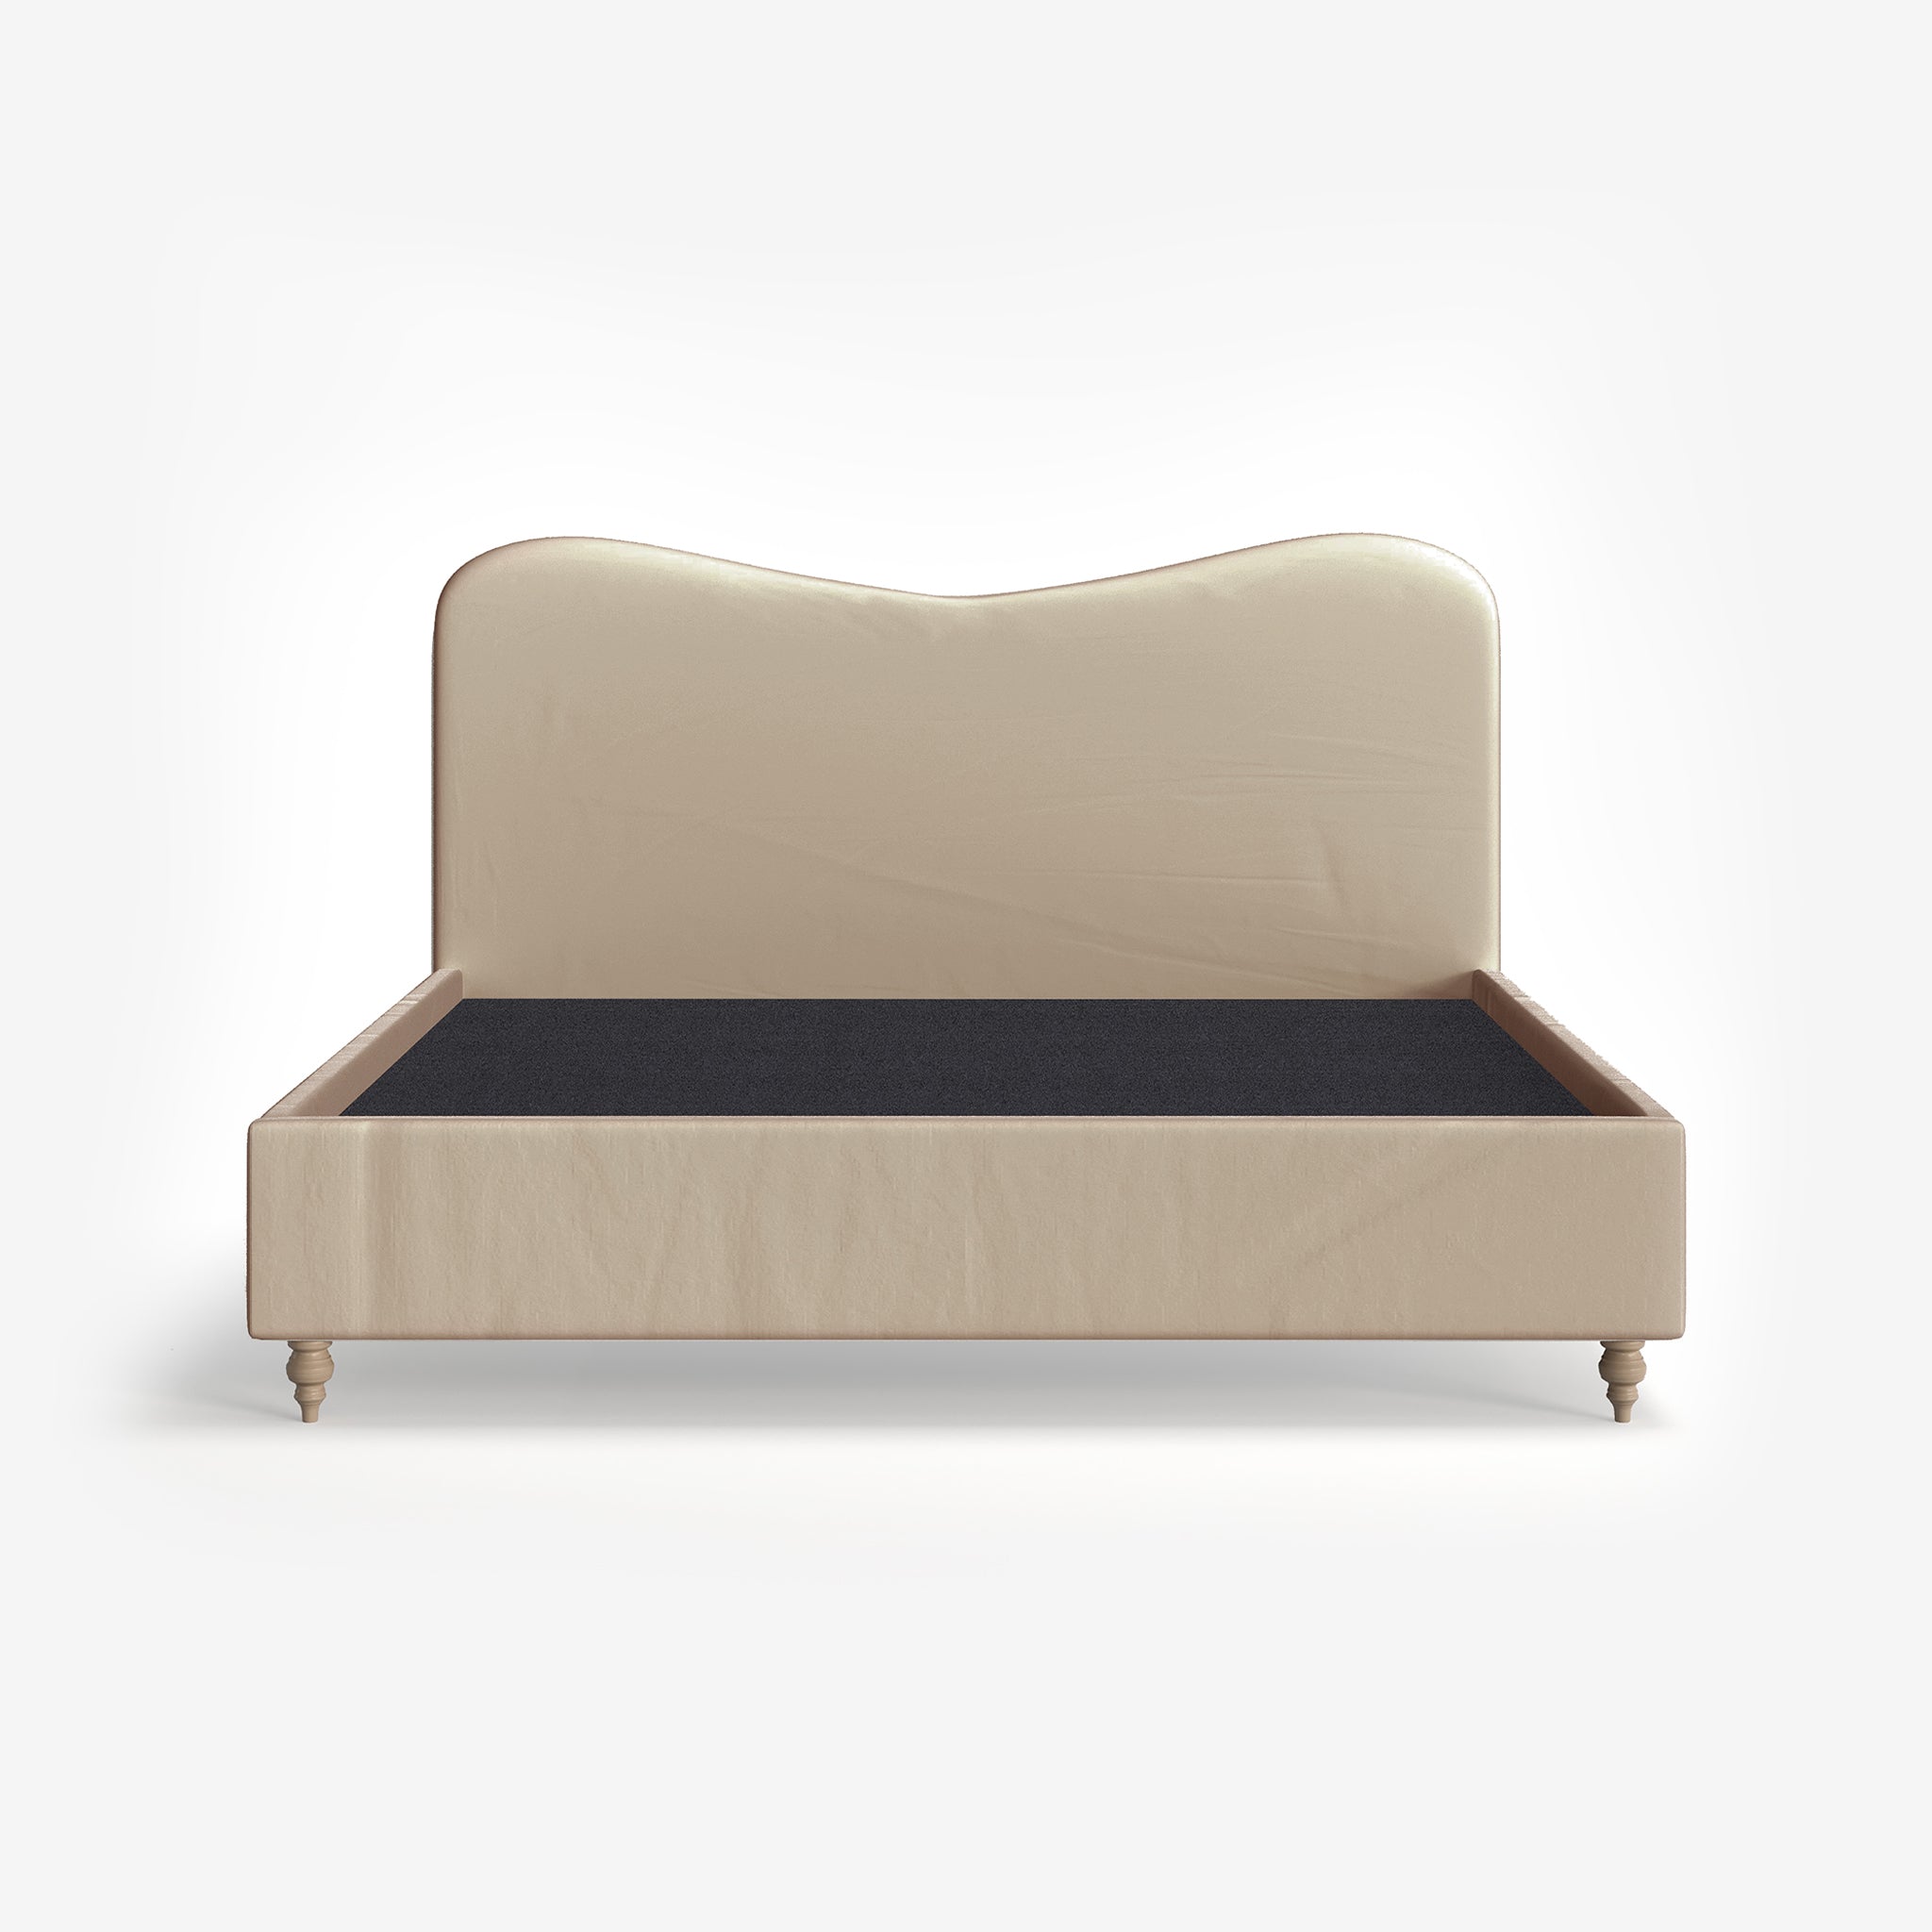 Bozier Velvet Upholstered Bed with Curved Headbaord and end-lift Ottoman Storage, Contemporary Interiors, Online Shopping, Craftsmanship, Wooden feet, Bazaar